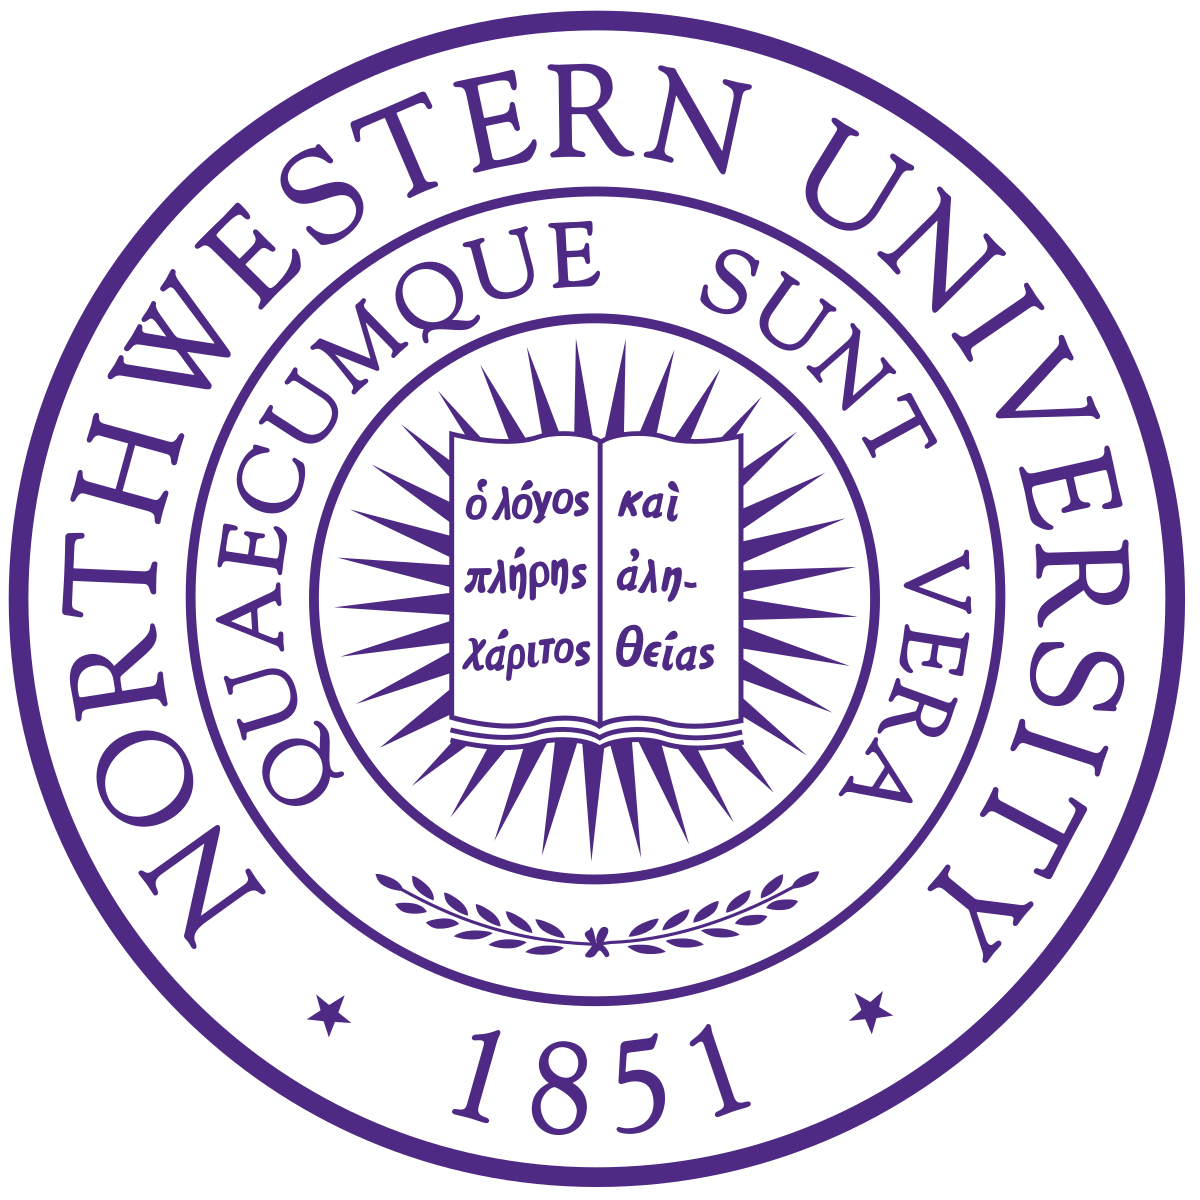 A logo of Northwestern University for our school profile